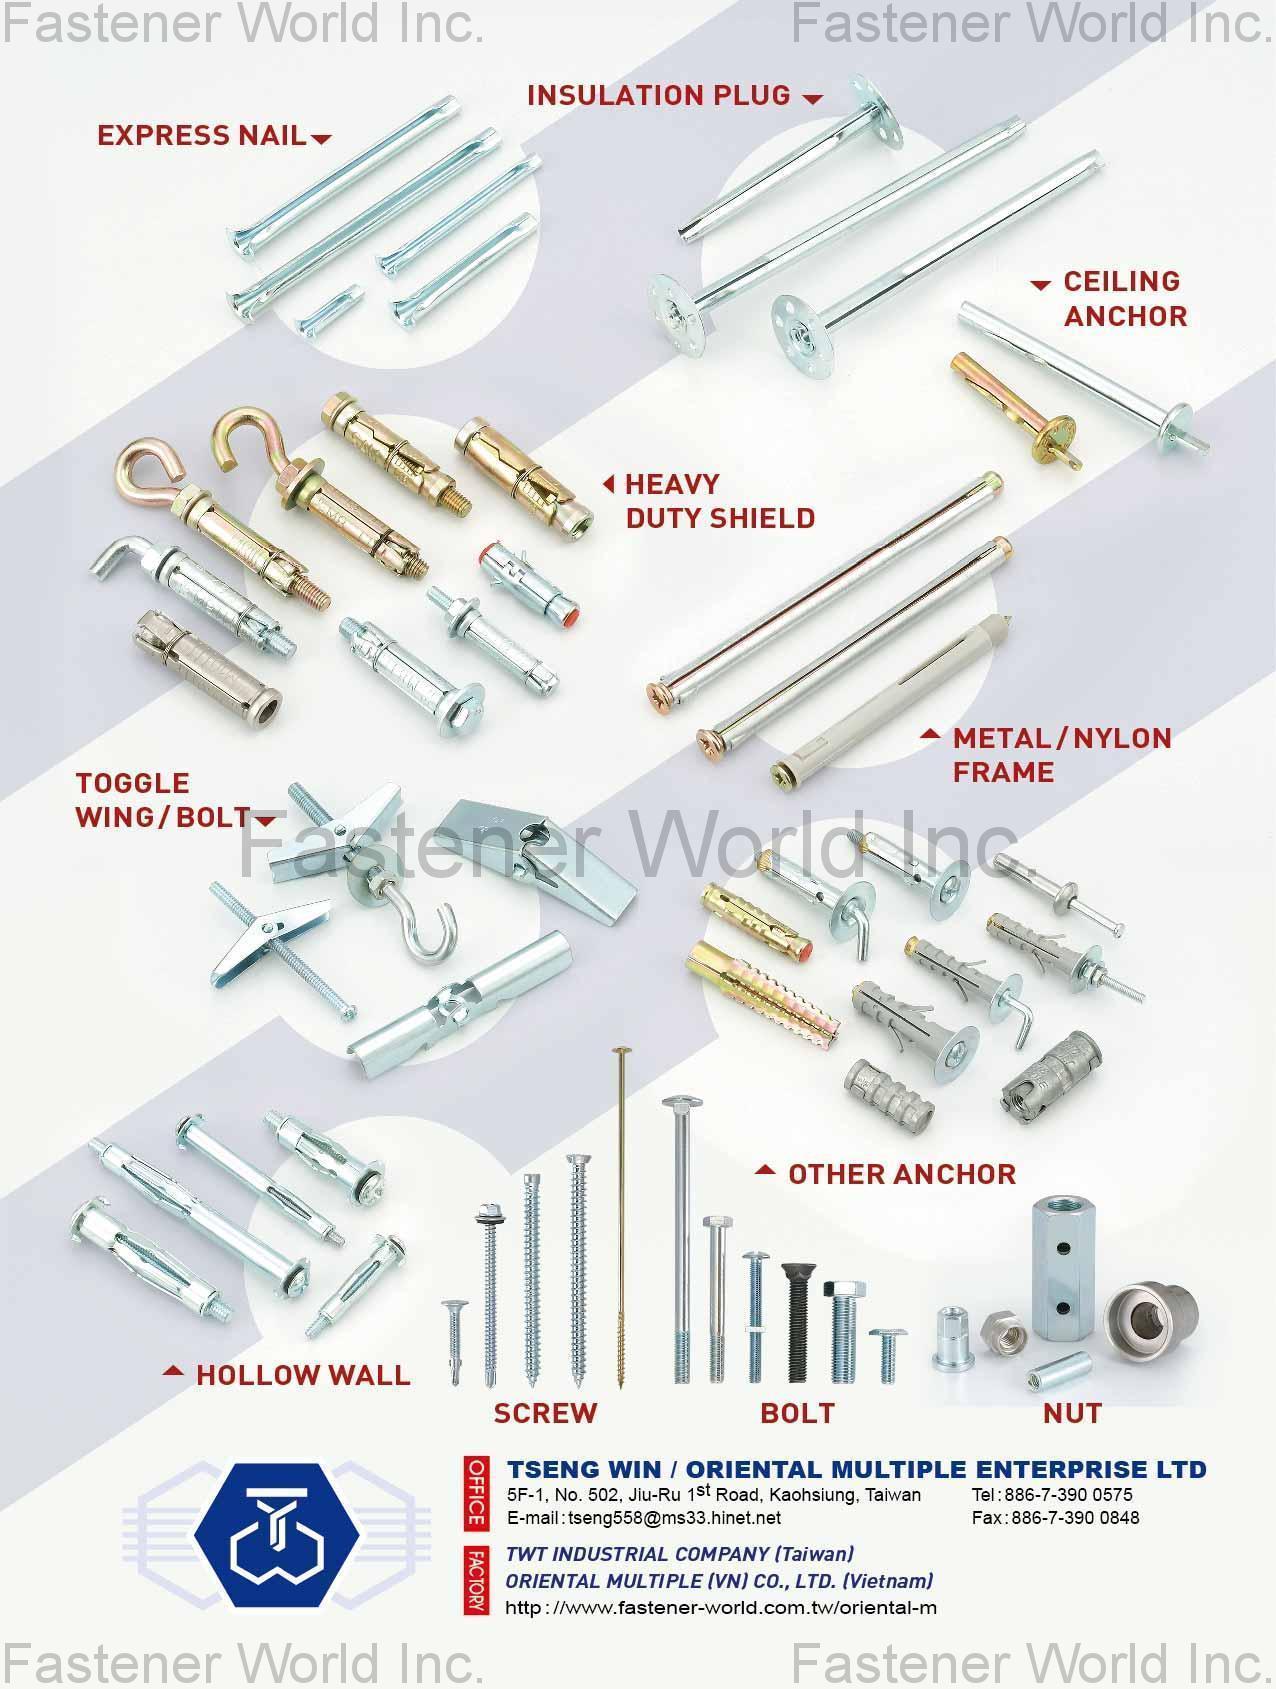 TSENG WIN / ORIENTAL MULTIPLE ENTERPRISE LTD. , Express Nail, Insulation Plug, Ceiling Anchor, Heavy Duty Shield, Toggle Wing/Bolt, Metal/Nylon Frame, Other Anchor, Hollow Wall, Screw, Bolt, Nut , Anchors